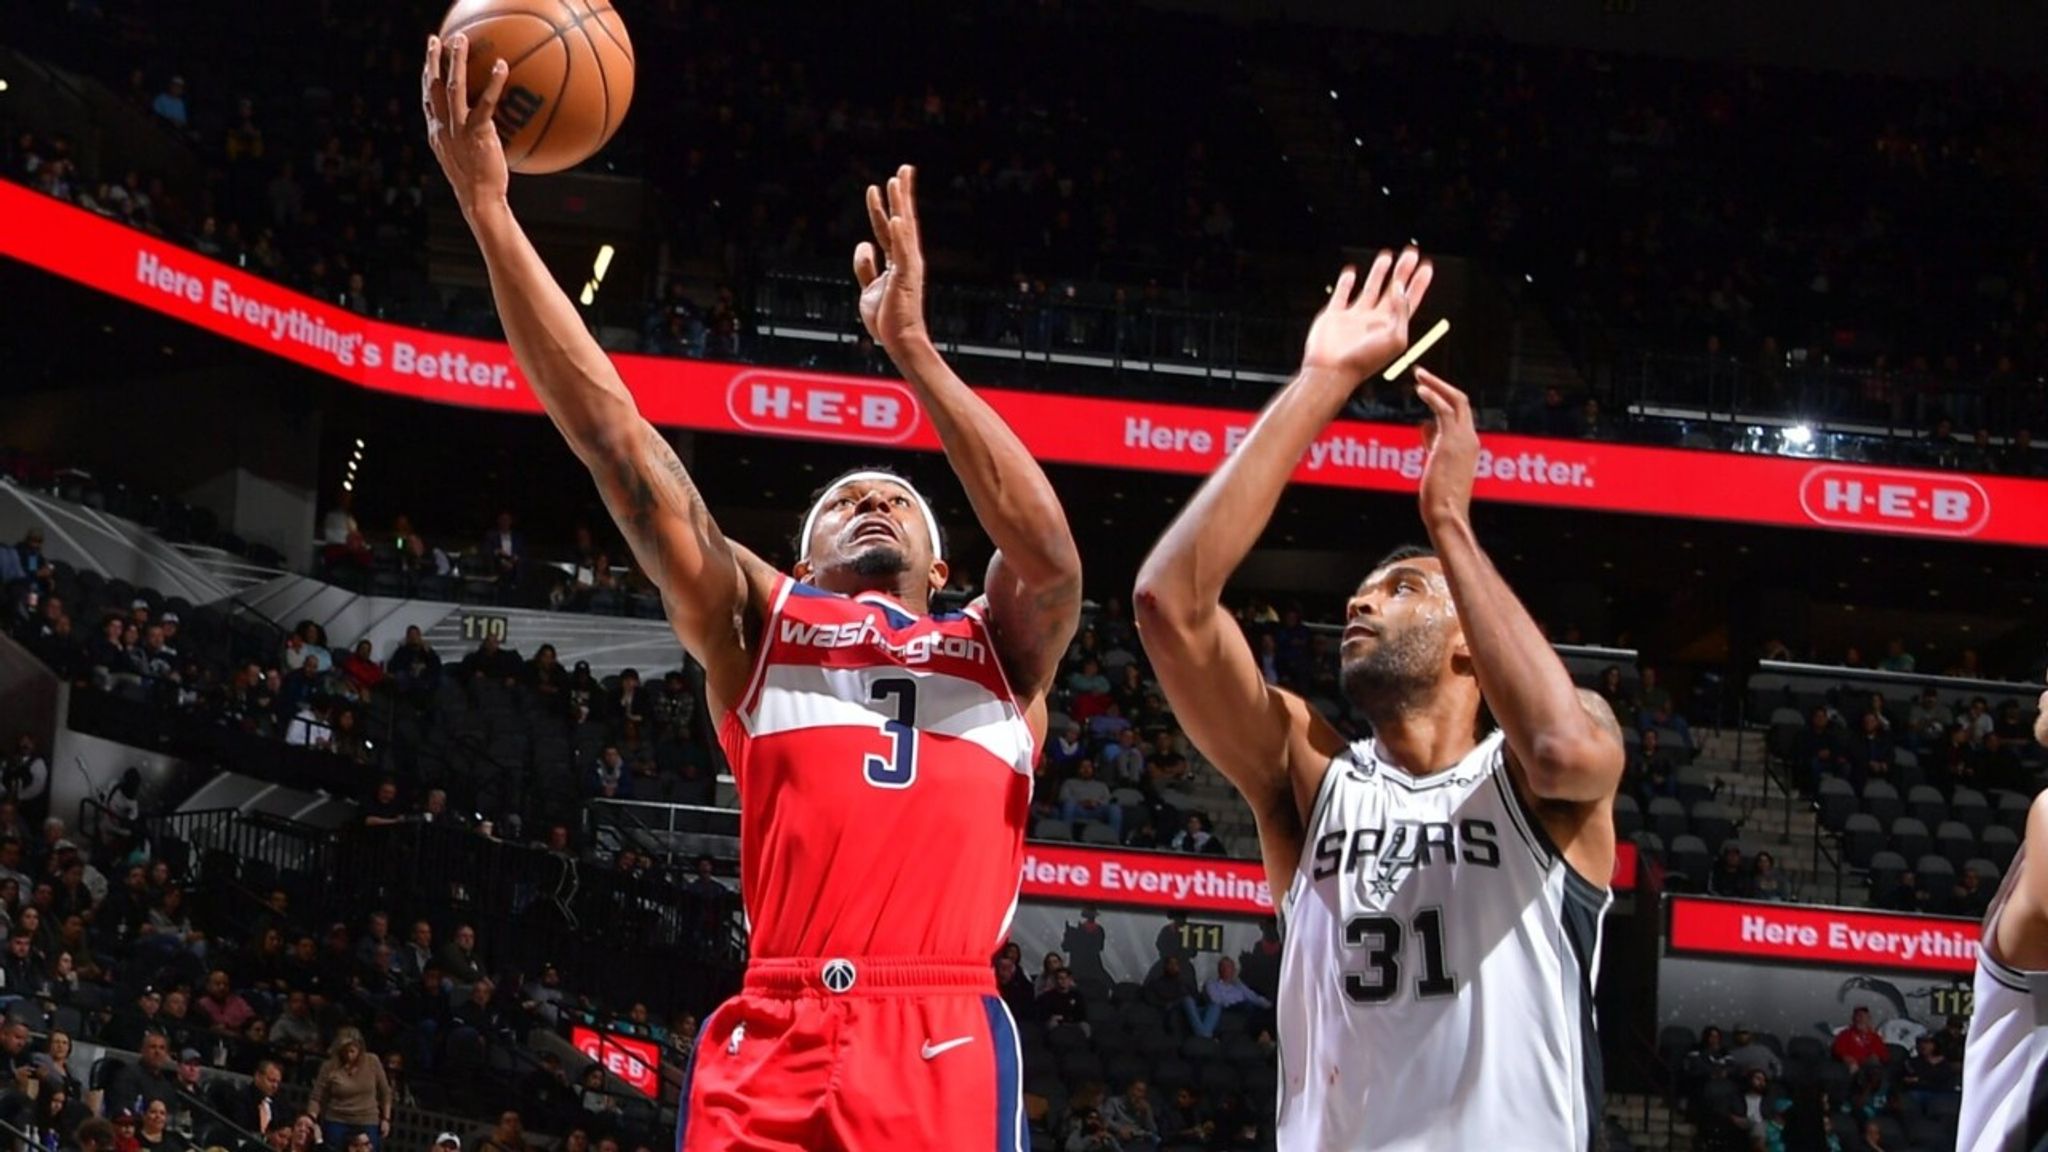 Washington Wizards win in San Antonio for 1st time since 1999